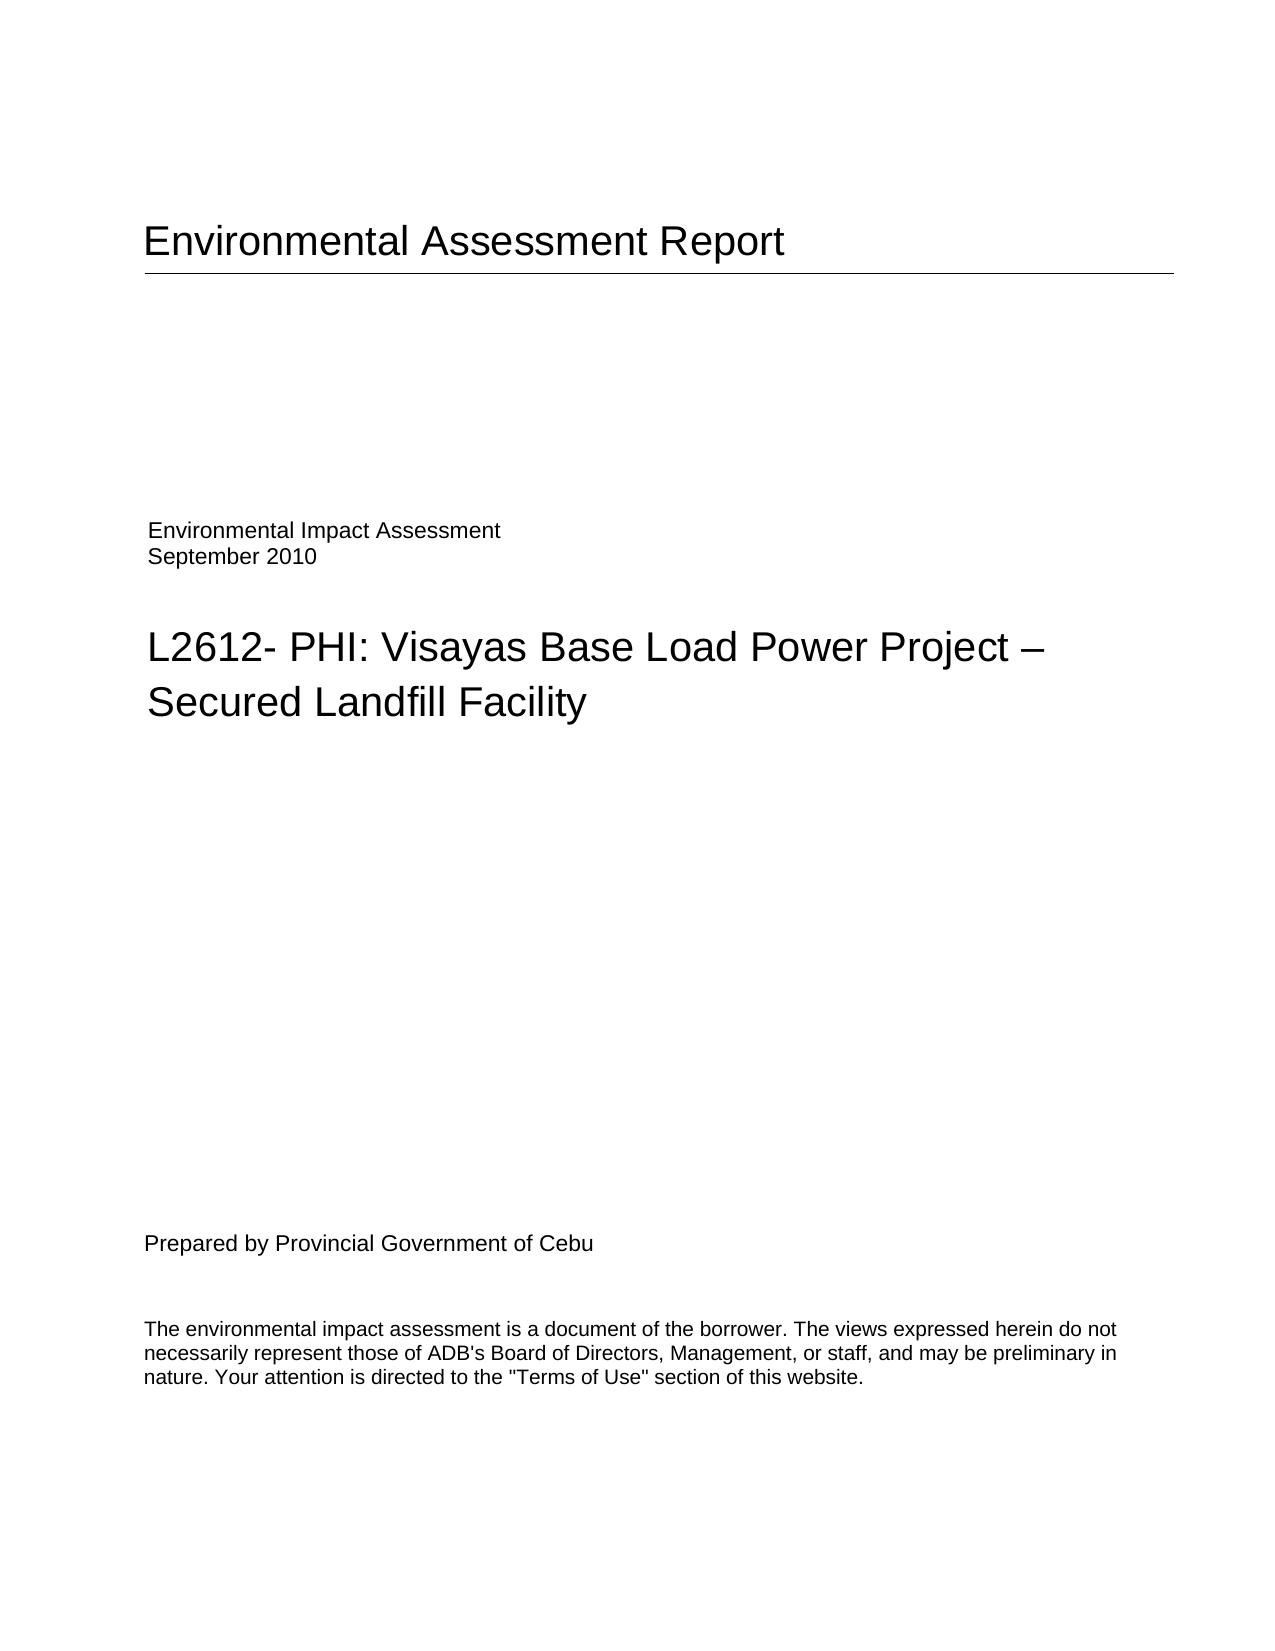 Environmental Impact Assessment: Philippines, Visayas Base Load Power Project - Secured Landfill Facility